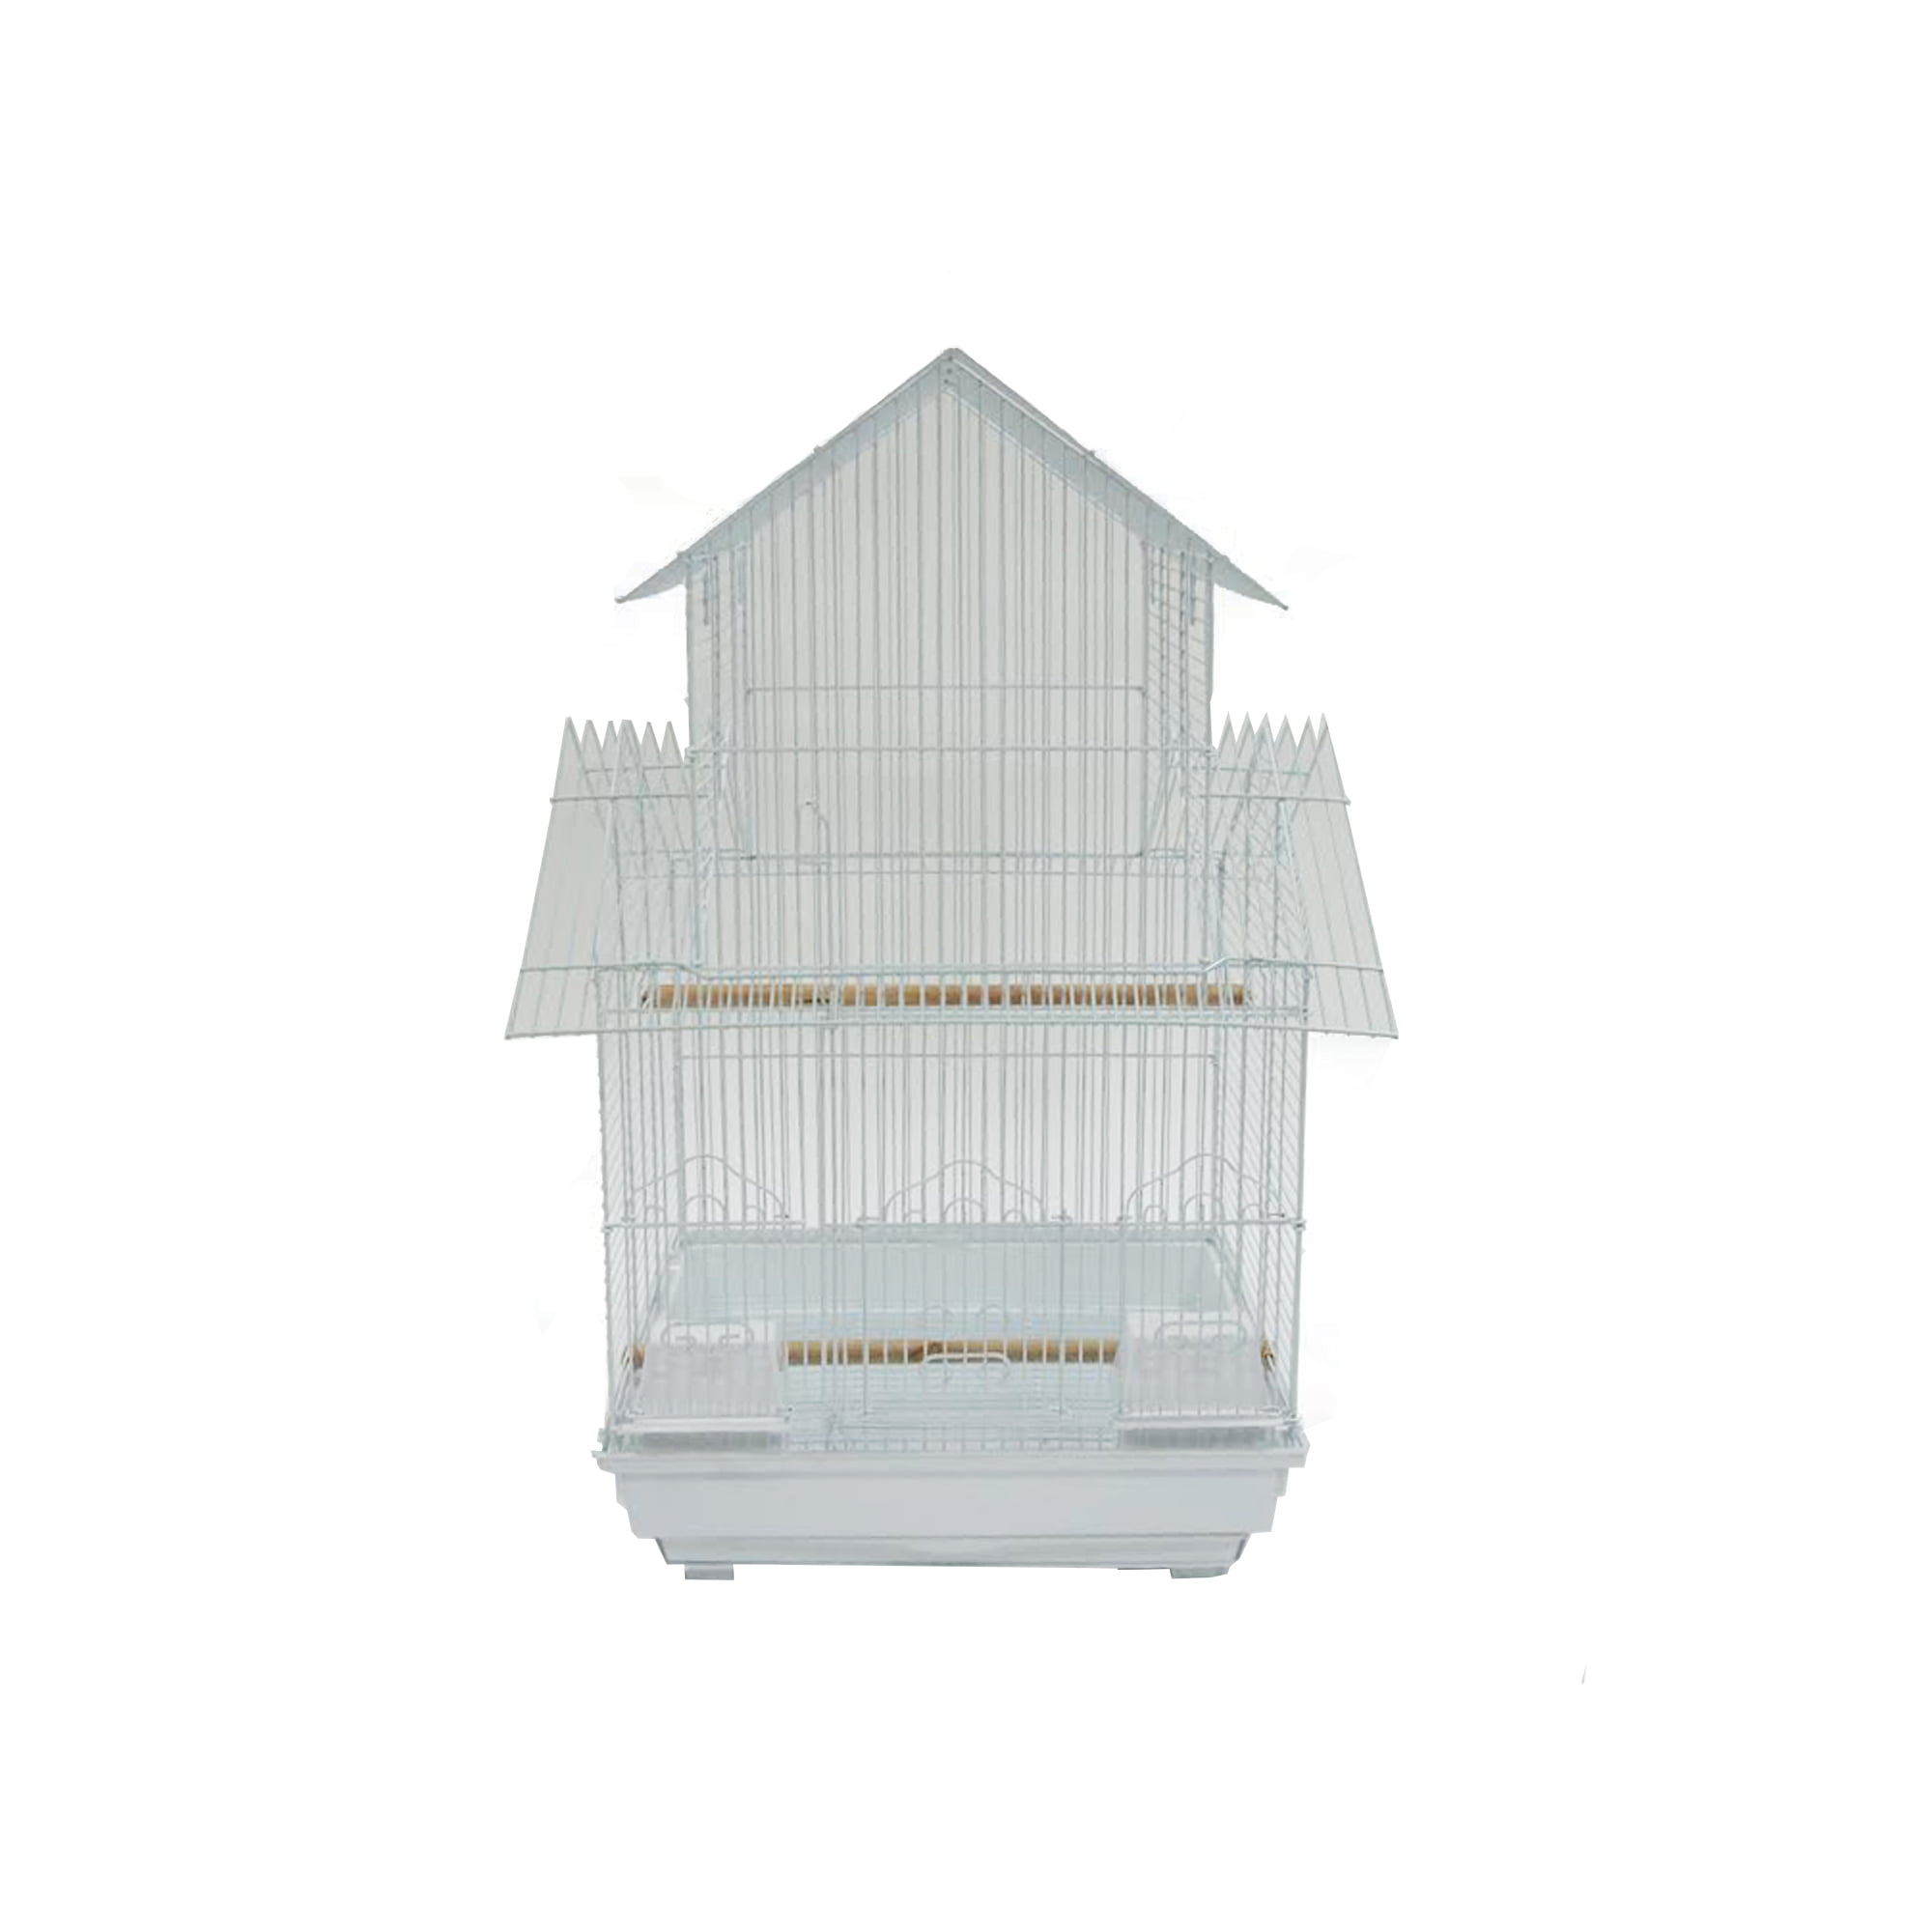 Yml 5844 3/8-Inch Bar Spacing Pagoda Small Bird Cage with Stand-18-Inch X14-Inch in White 